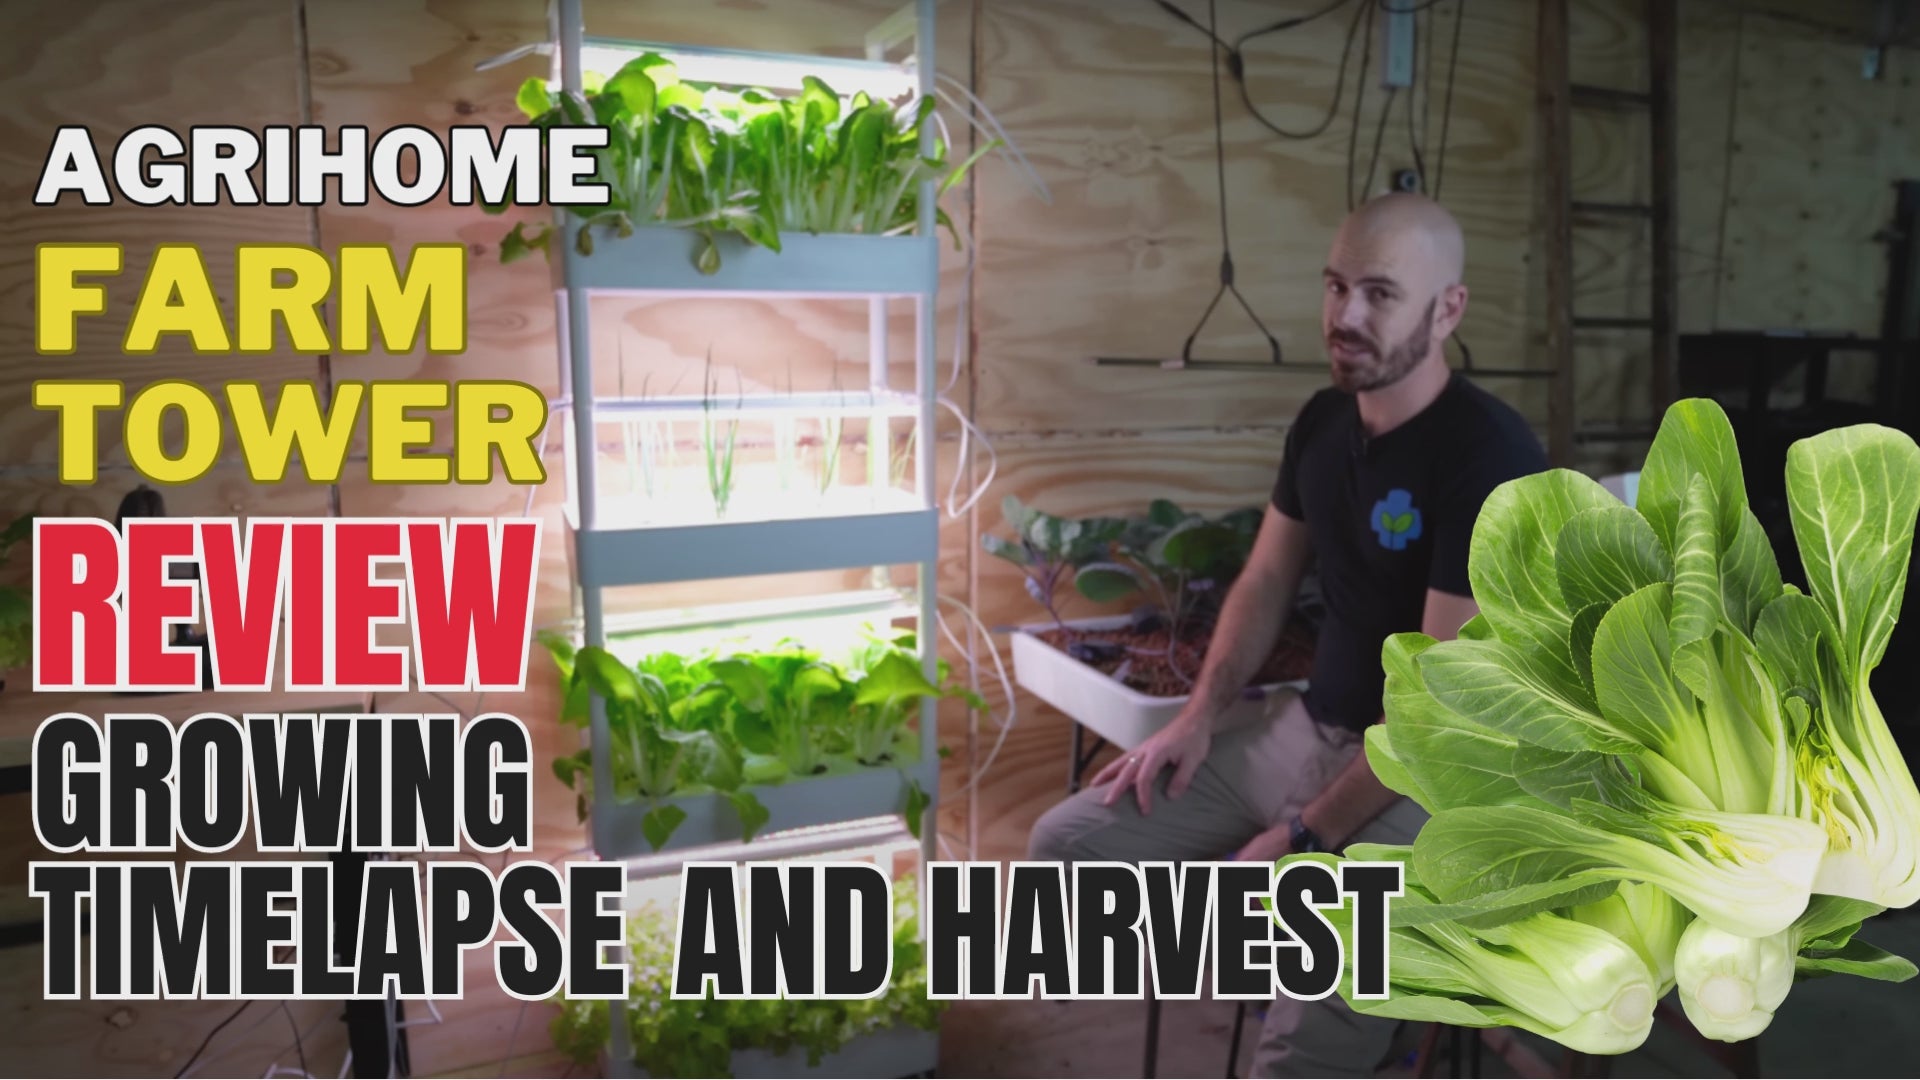 Load video: agrihome farmtower grow timelapse and harvest 4 weeks